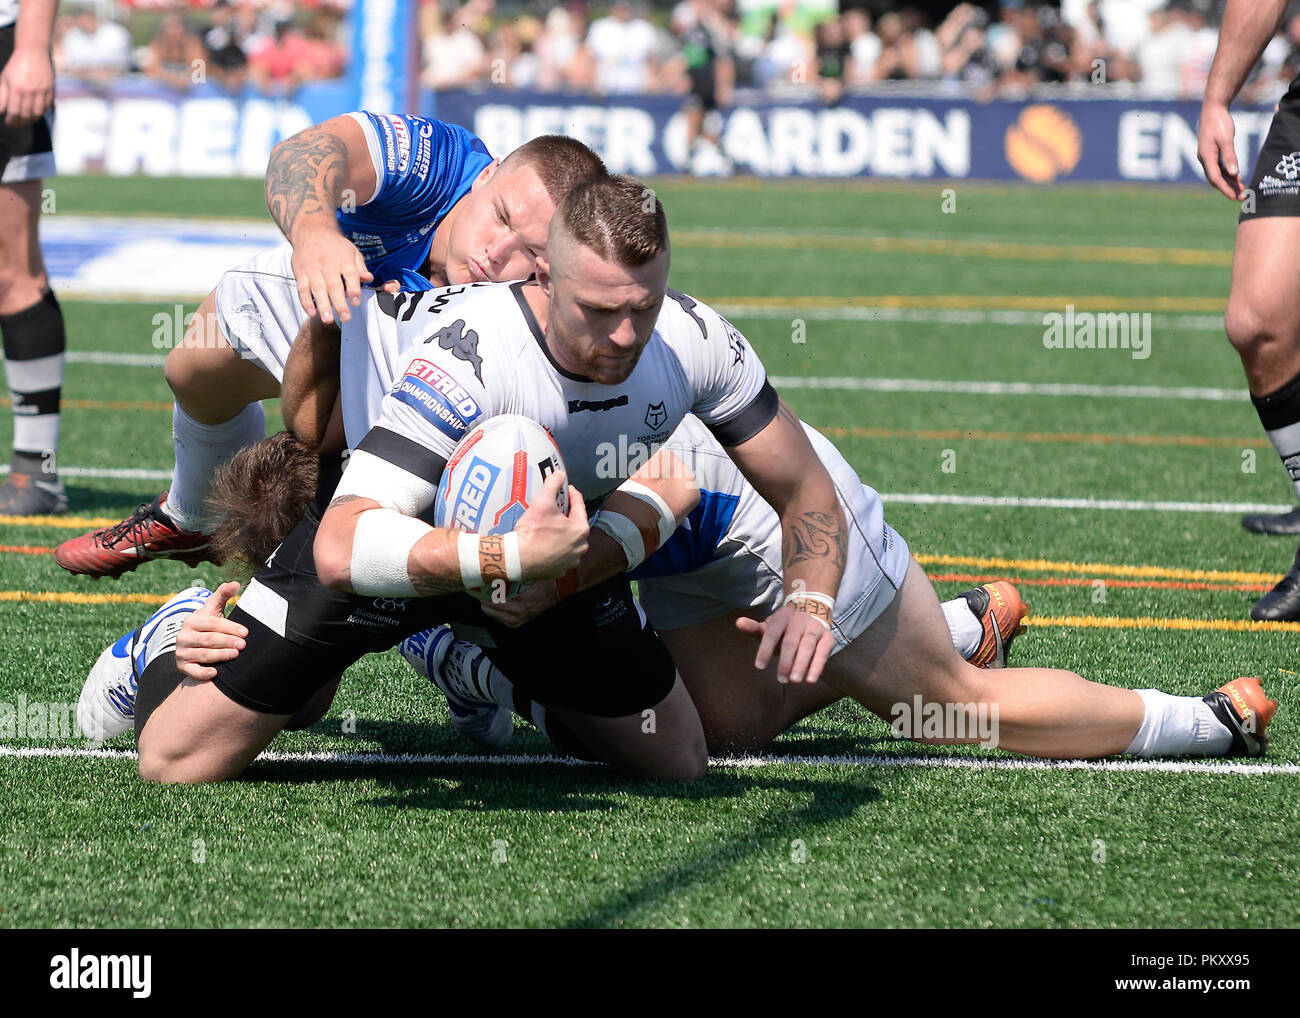 Lamport Stadium, Toronto, Ontario, Canada, 15th September 2018.   Adam Sidlow of Toronto Wolfpack on the attack against Toulouse Olympique during Toronto Wolfpack v Toulouse Olympique in the Super 8's The Qualifiers.   Credit: Touchlinepics/Alamy Live News Stock Photo